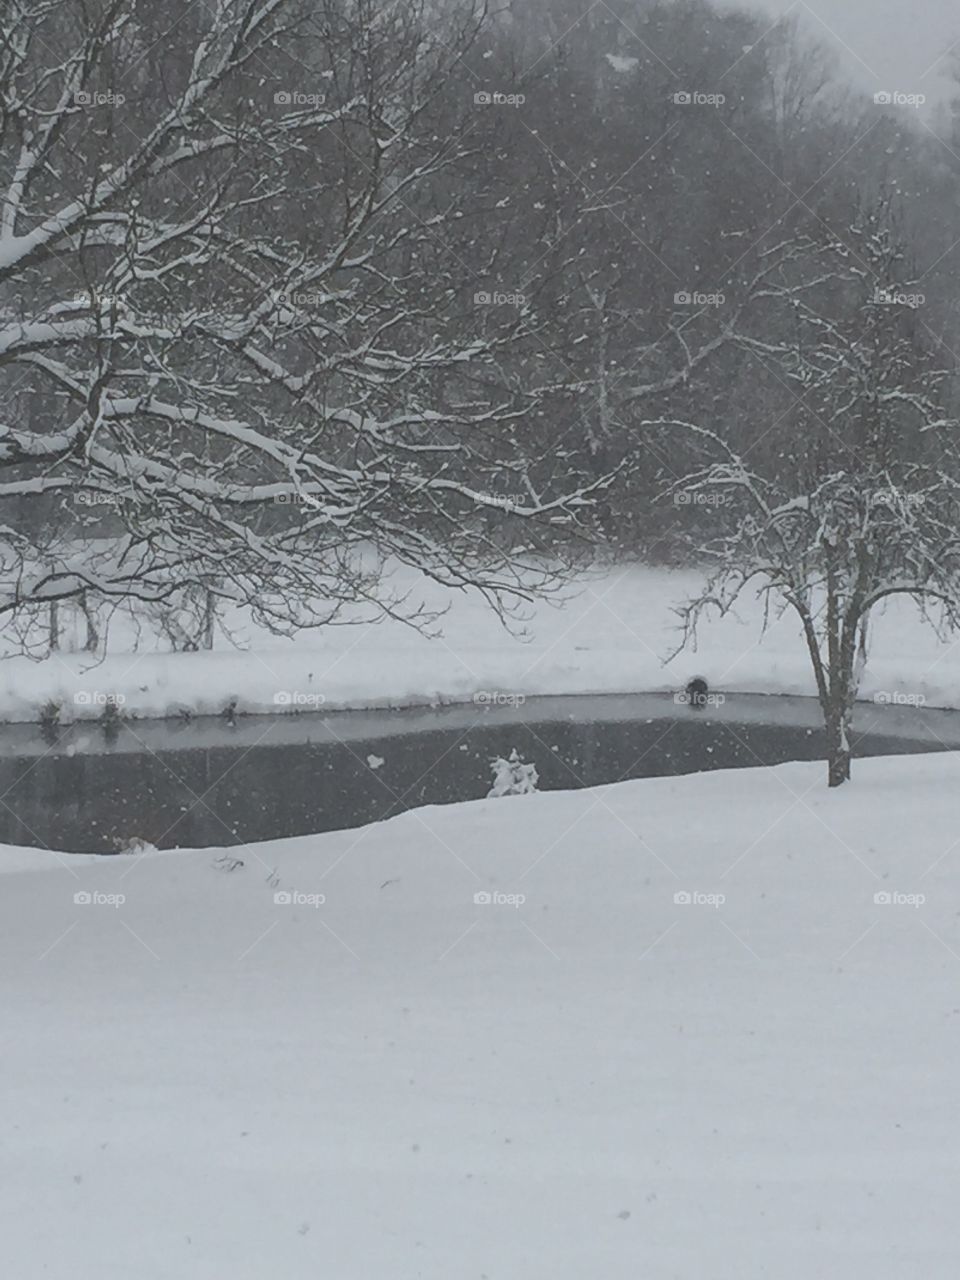 Snow at the pond!